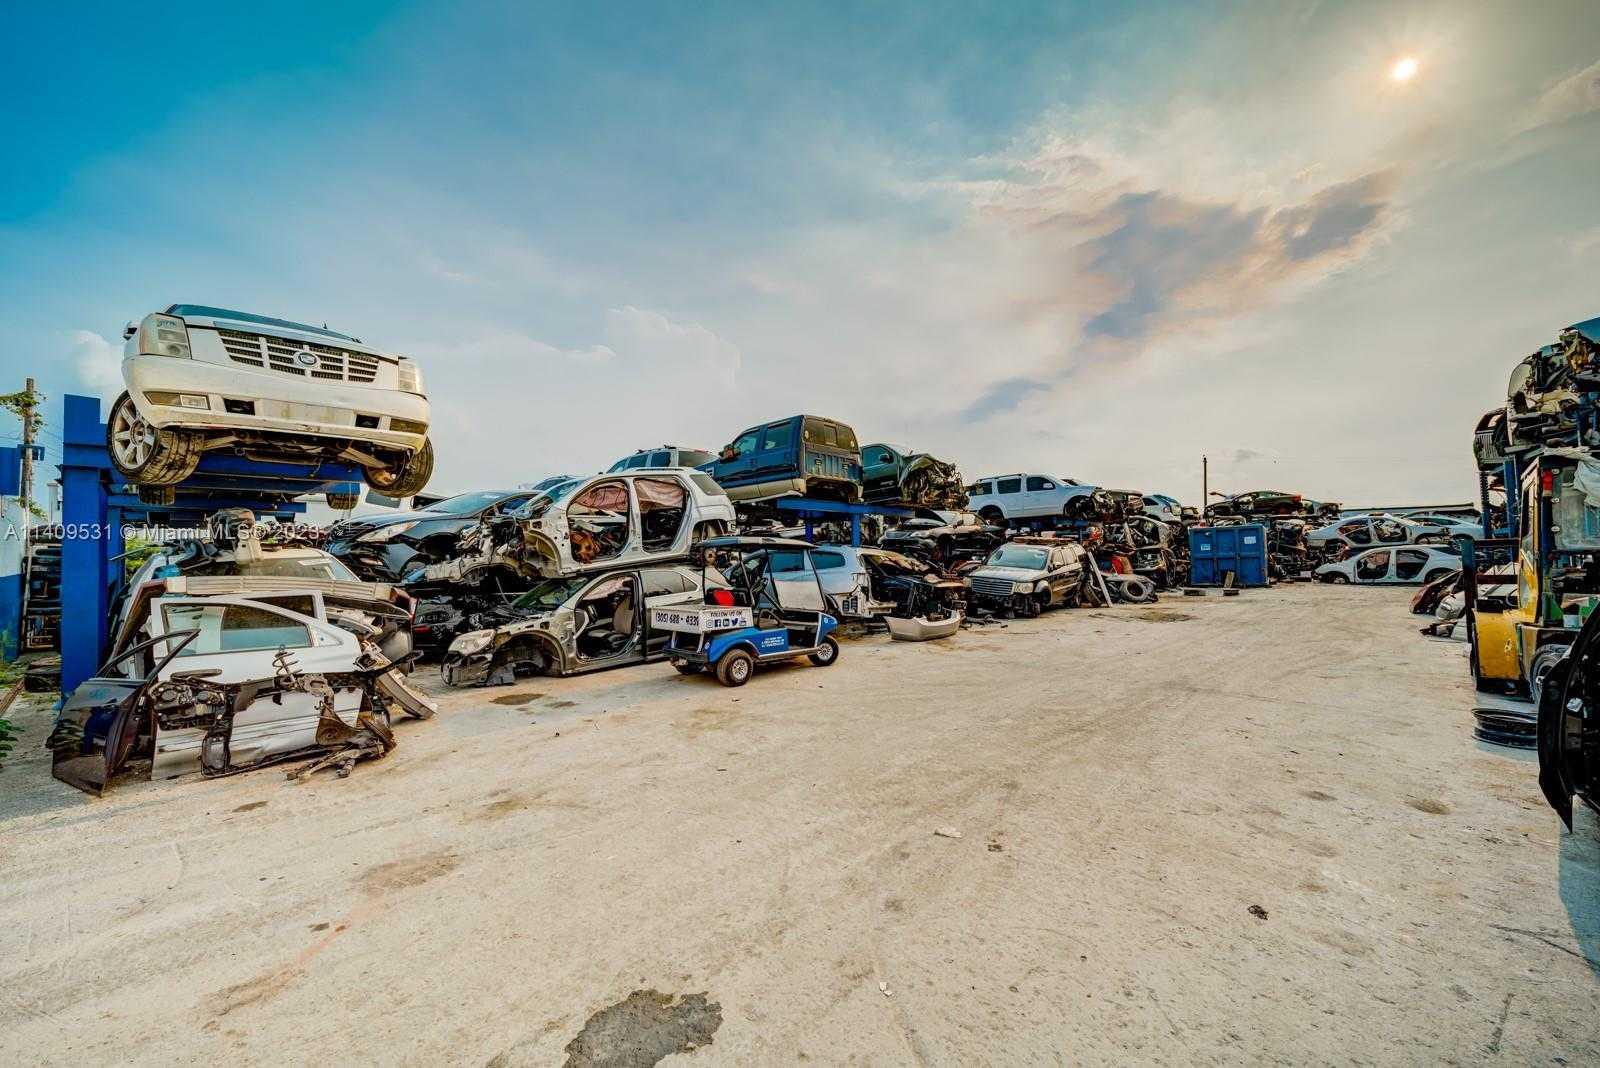 2 2 Junkyards For Sale in South florida, Miami, Automotive,  for sale, Sandra Benkahla, The 305 Agency